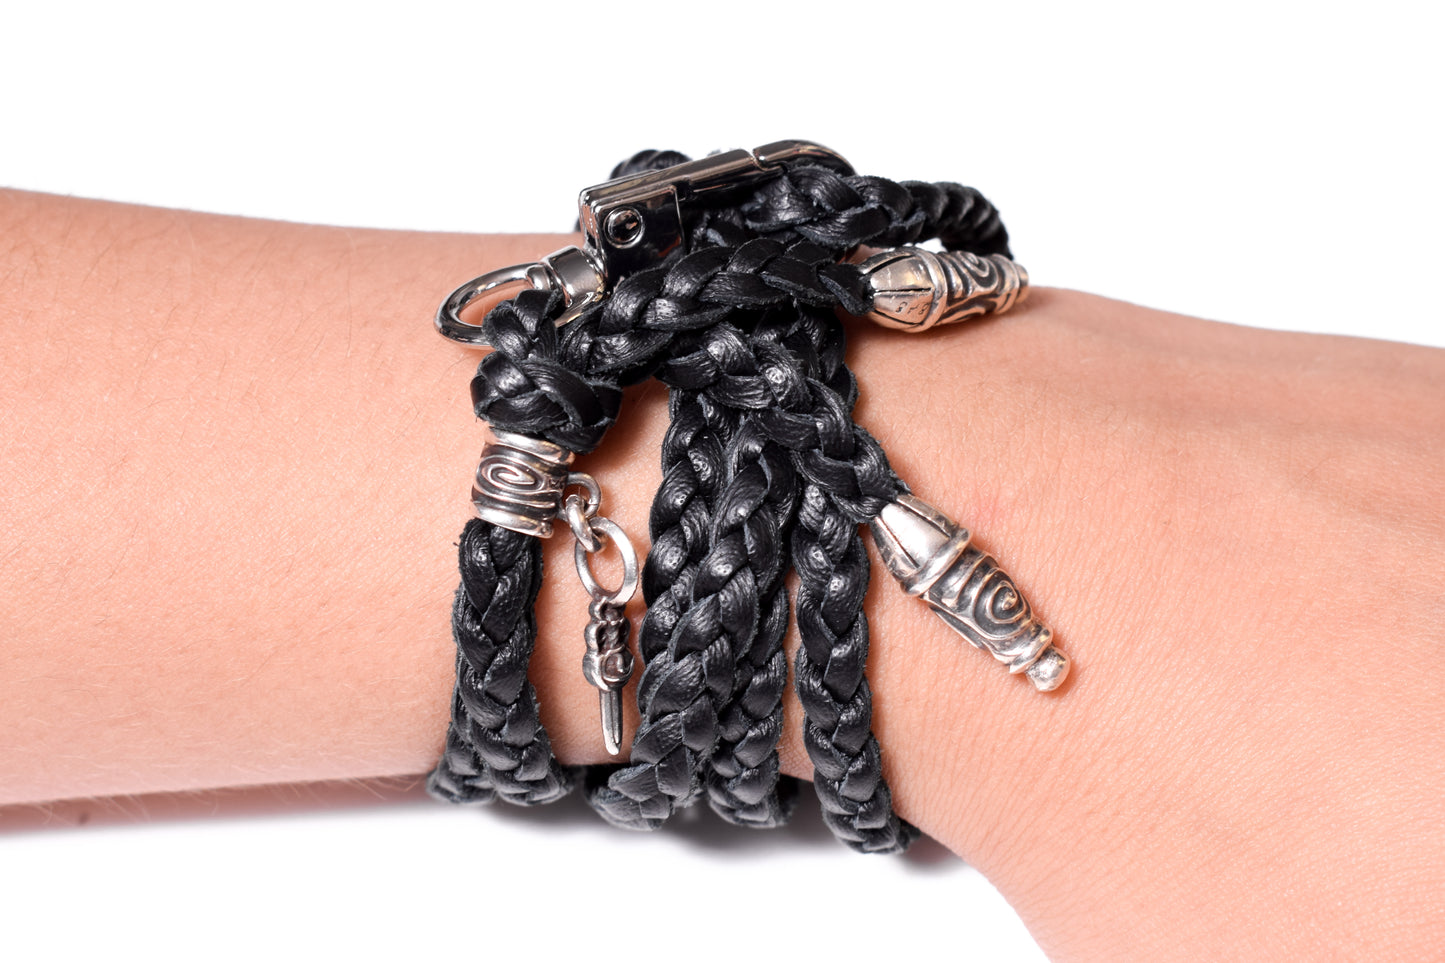 Laser-engraved Silicone Smartphone Support & Genuine Leather Bracelet/Crossbody/Necklace 3 double hand-braided strands, Brown, or Black. 2 Spiral trerminals, 1 Pin, and a Dagger pendant, all made of 925 Sterling Silver.- S32 ​ ​